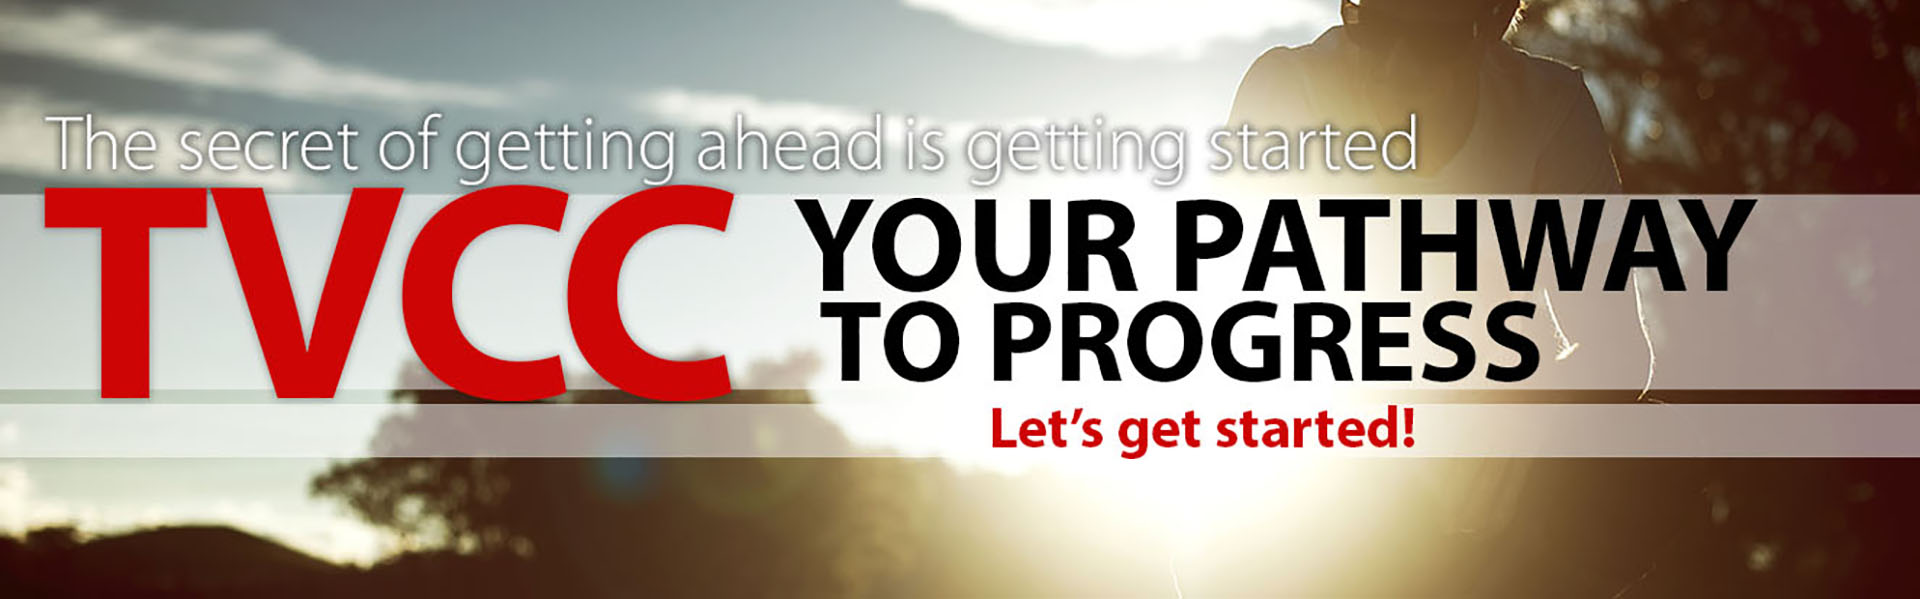 The secret of getting ahead is getting started. TVCC is your pathway to progress. Let's get started!